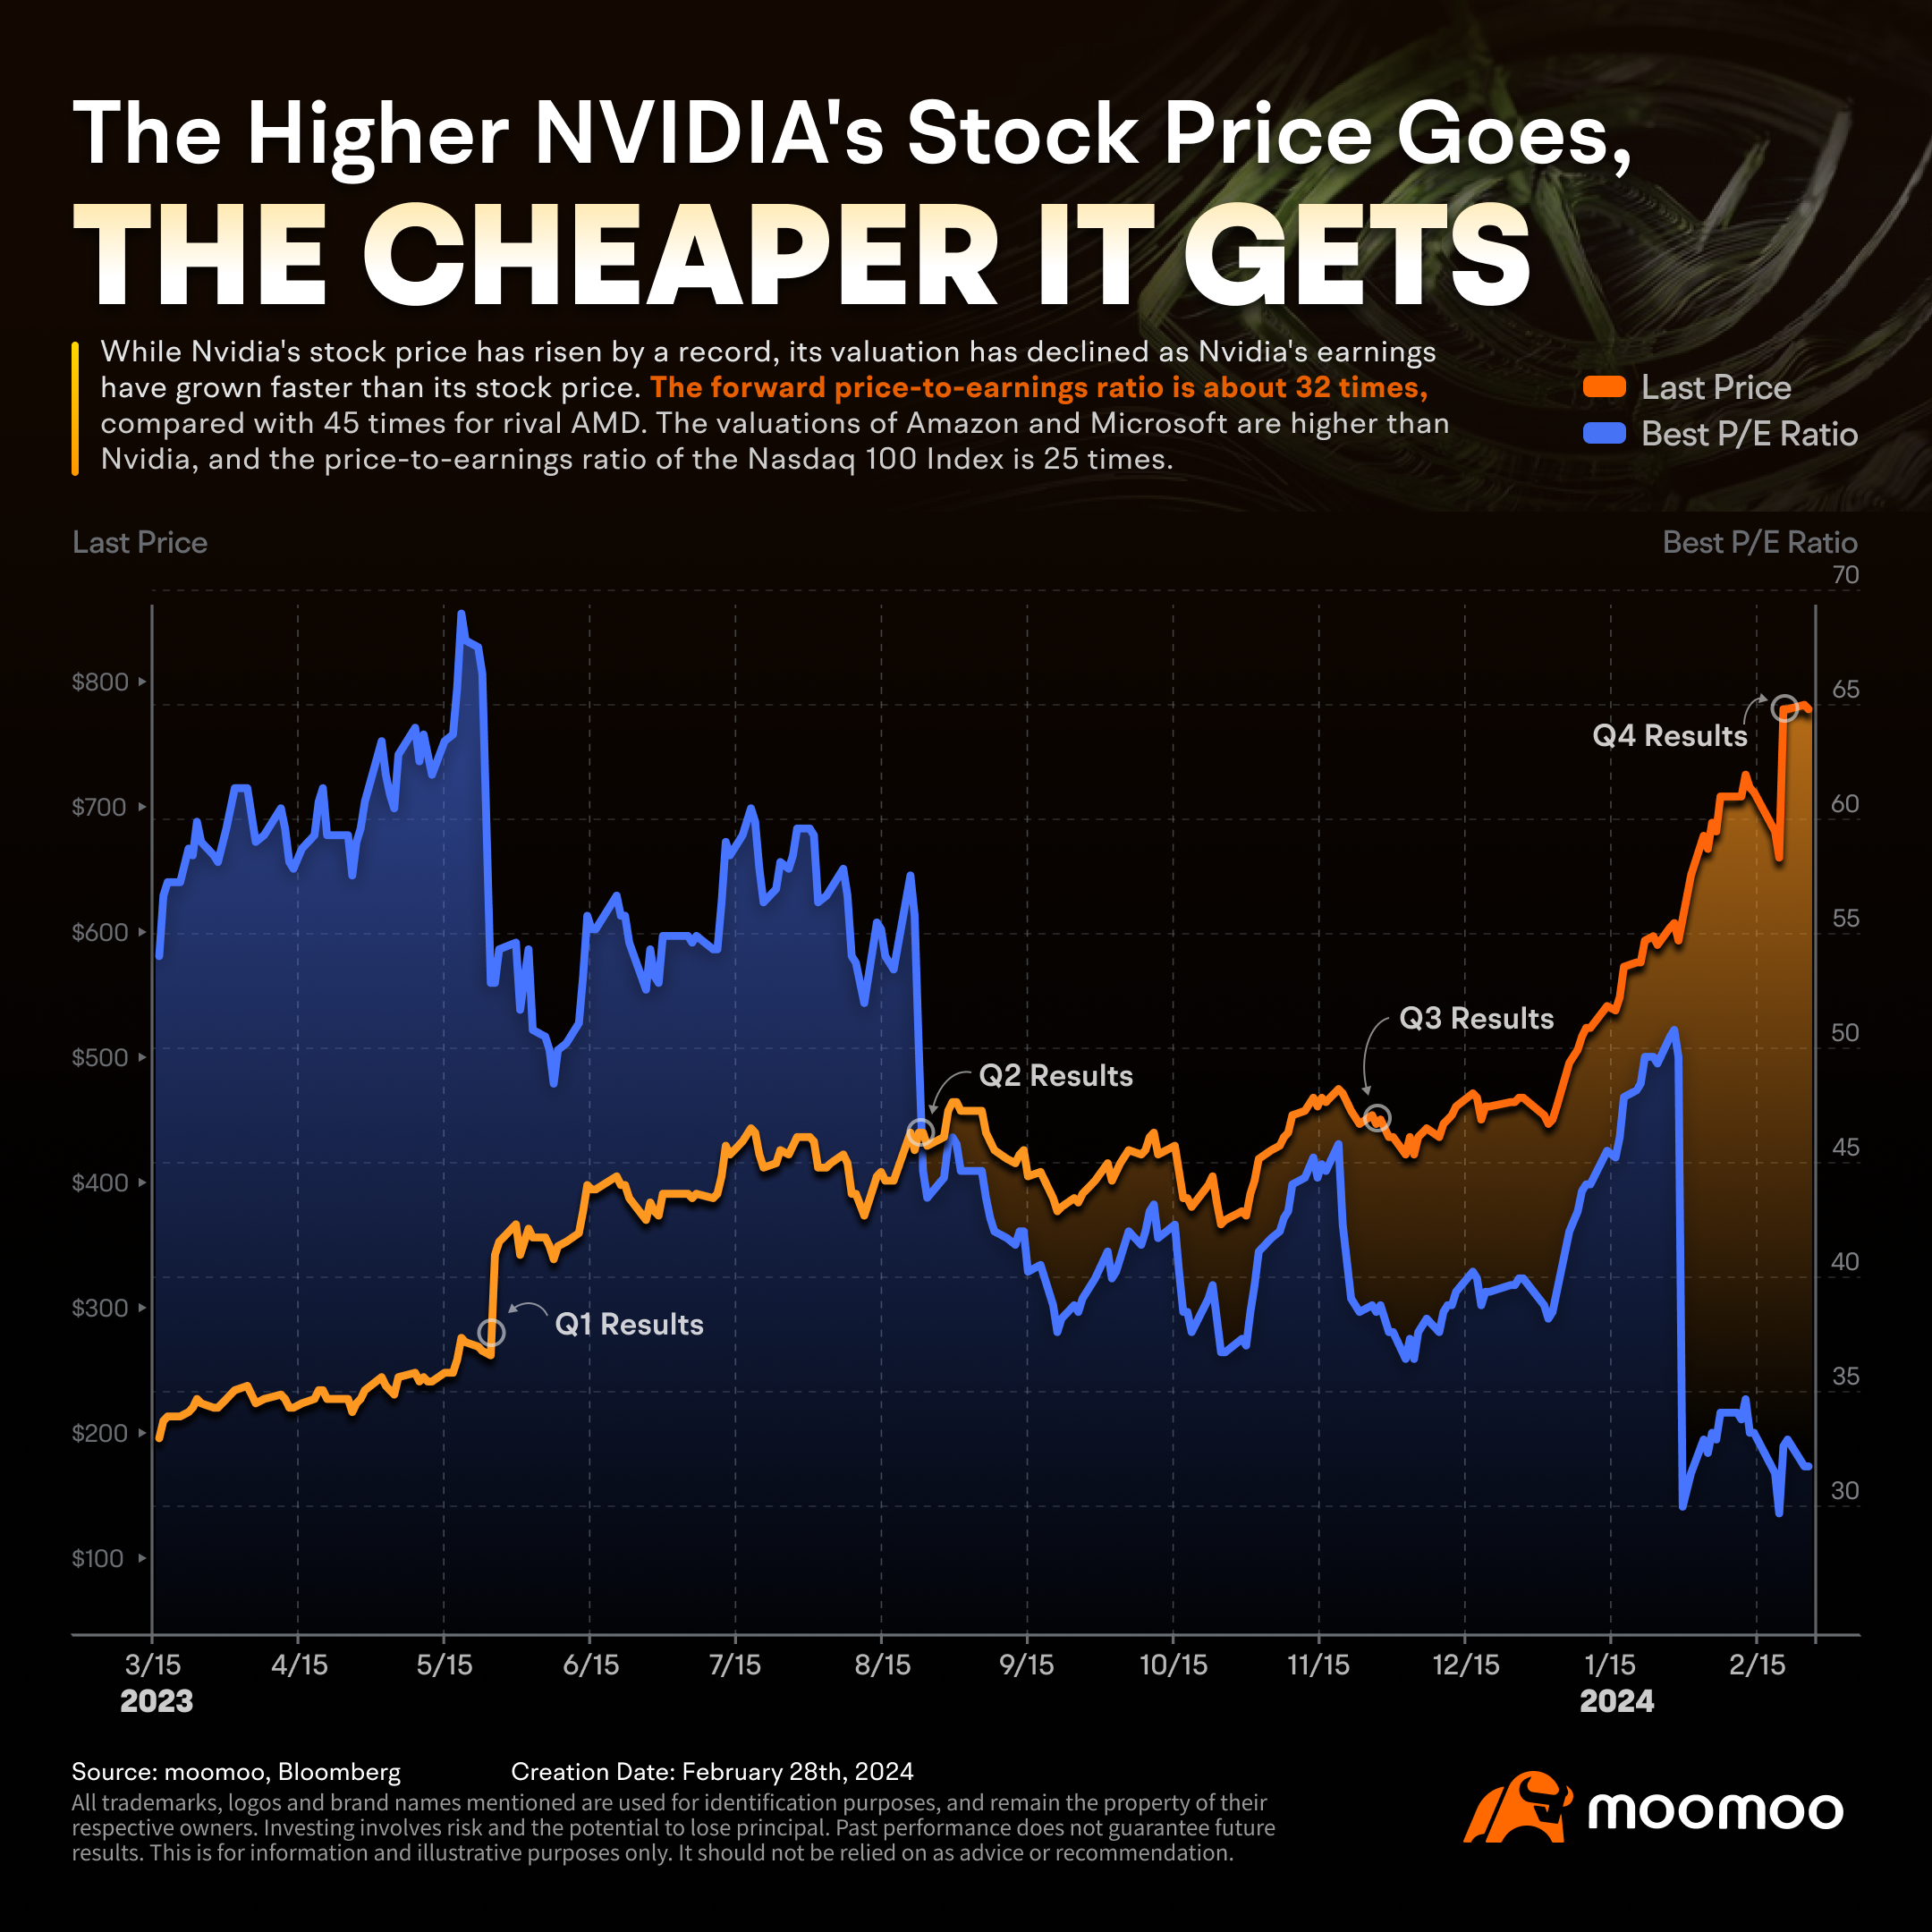 Tech Giant In One Chart: The Higher NVIDIA Stock Price Goes, The Cheaper It Gets